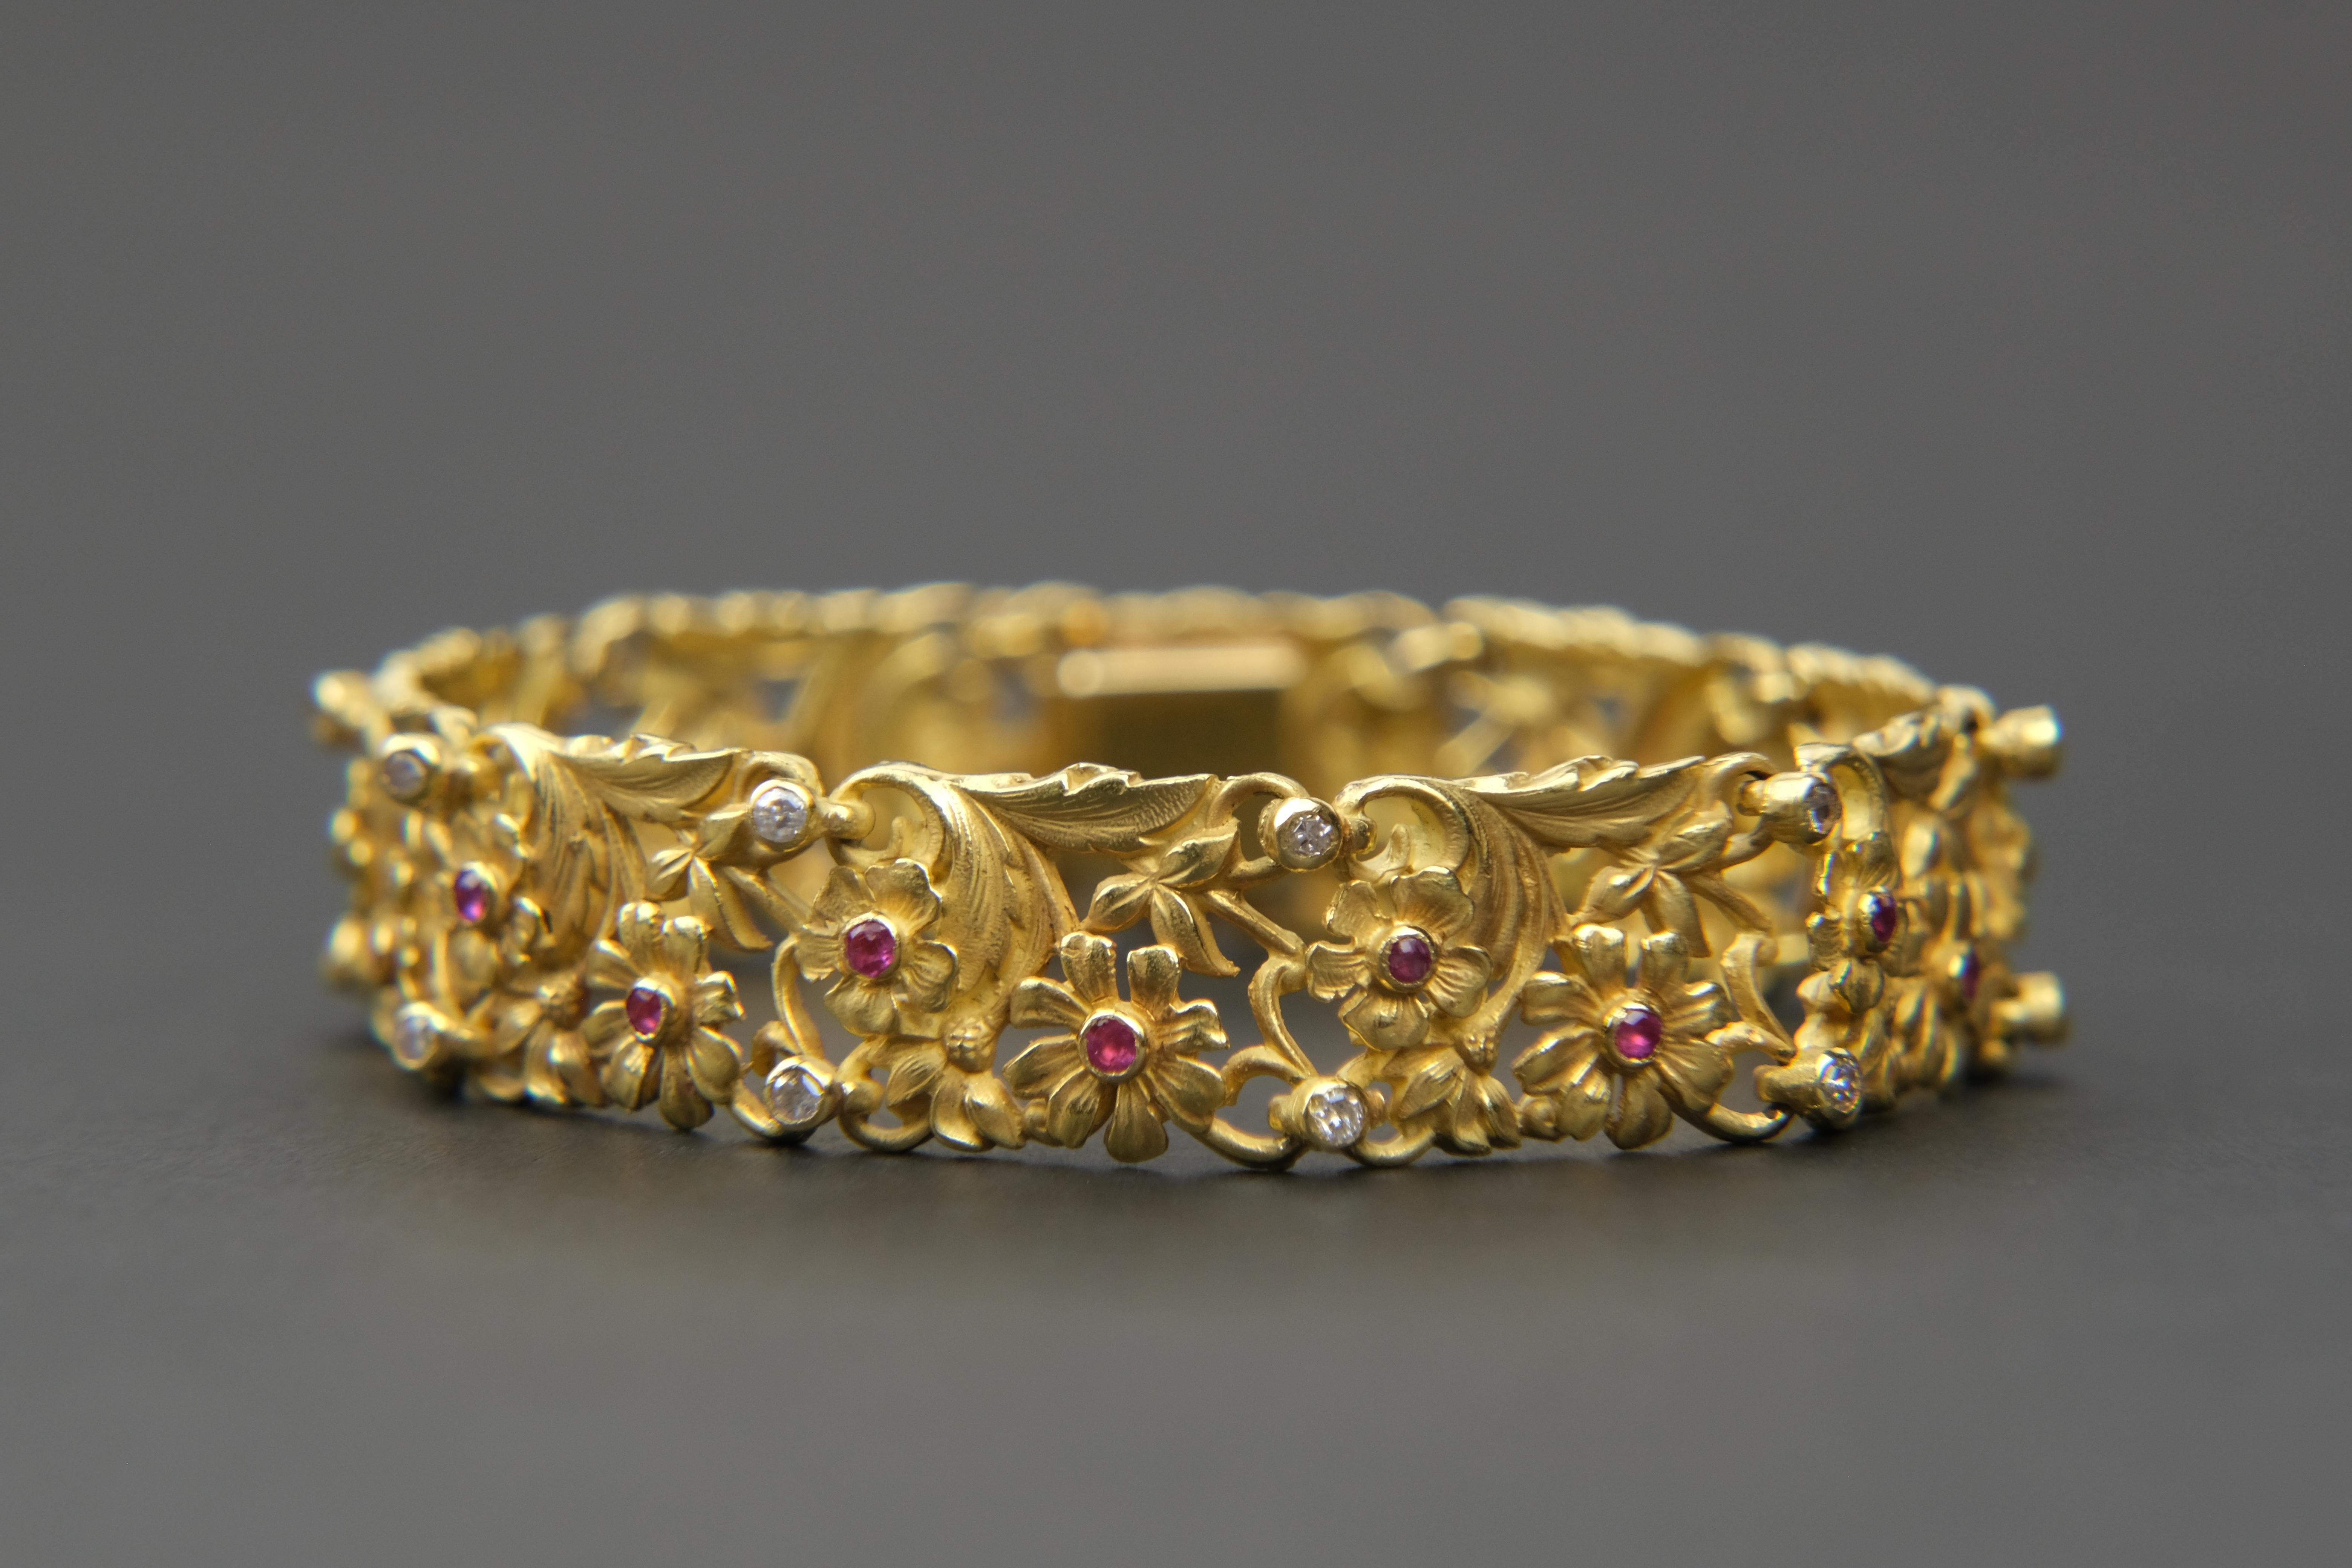 18K Art Nouveau Style Ruby and Diamond Panel Bracelet

These day s a lot of jewelry is chunky and aggressive. Much of it lacks a certain femininity that many like. Some jewelry is actual classified as Brutalist, and ugly name and in most cases, ugly